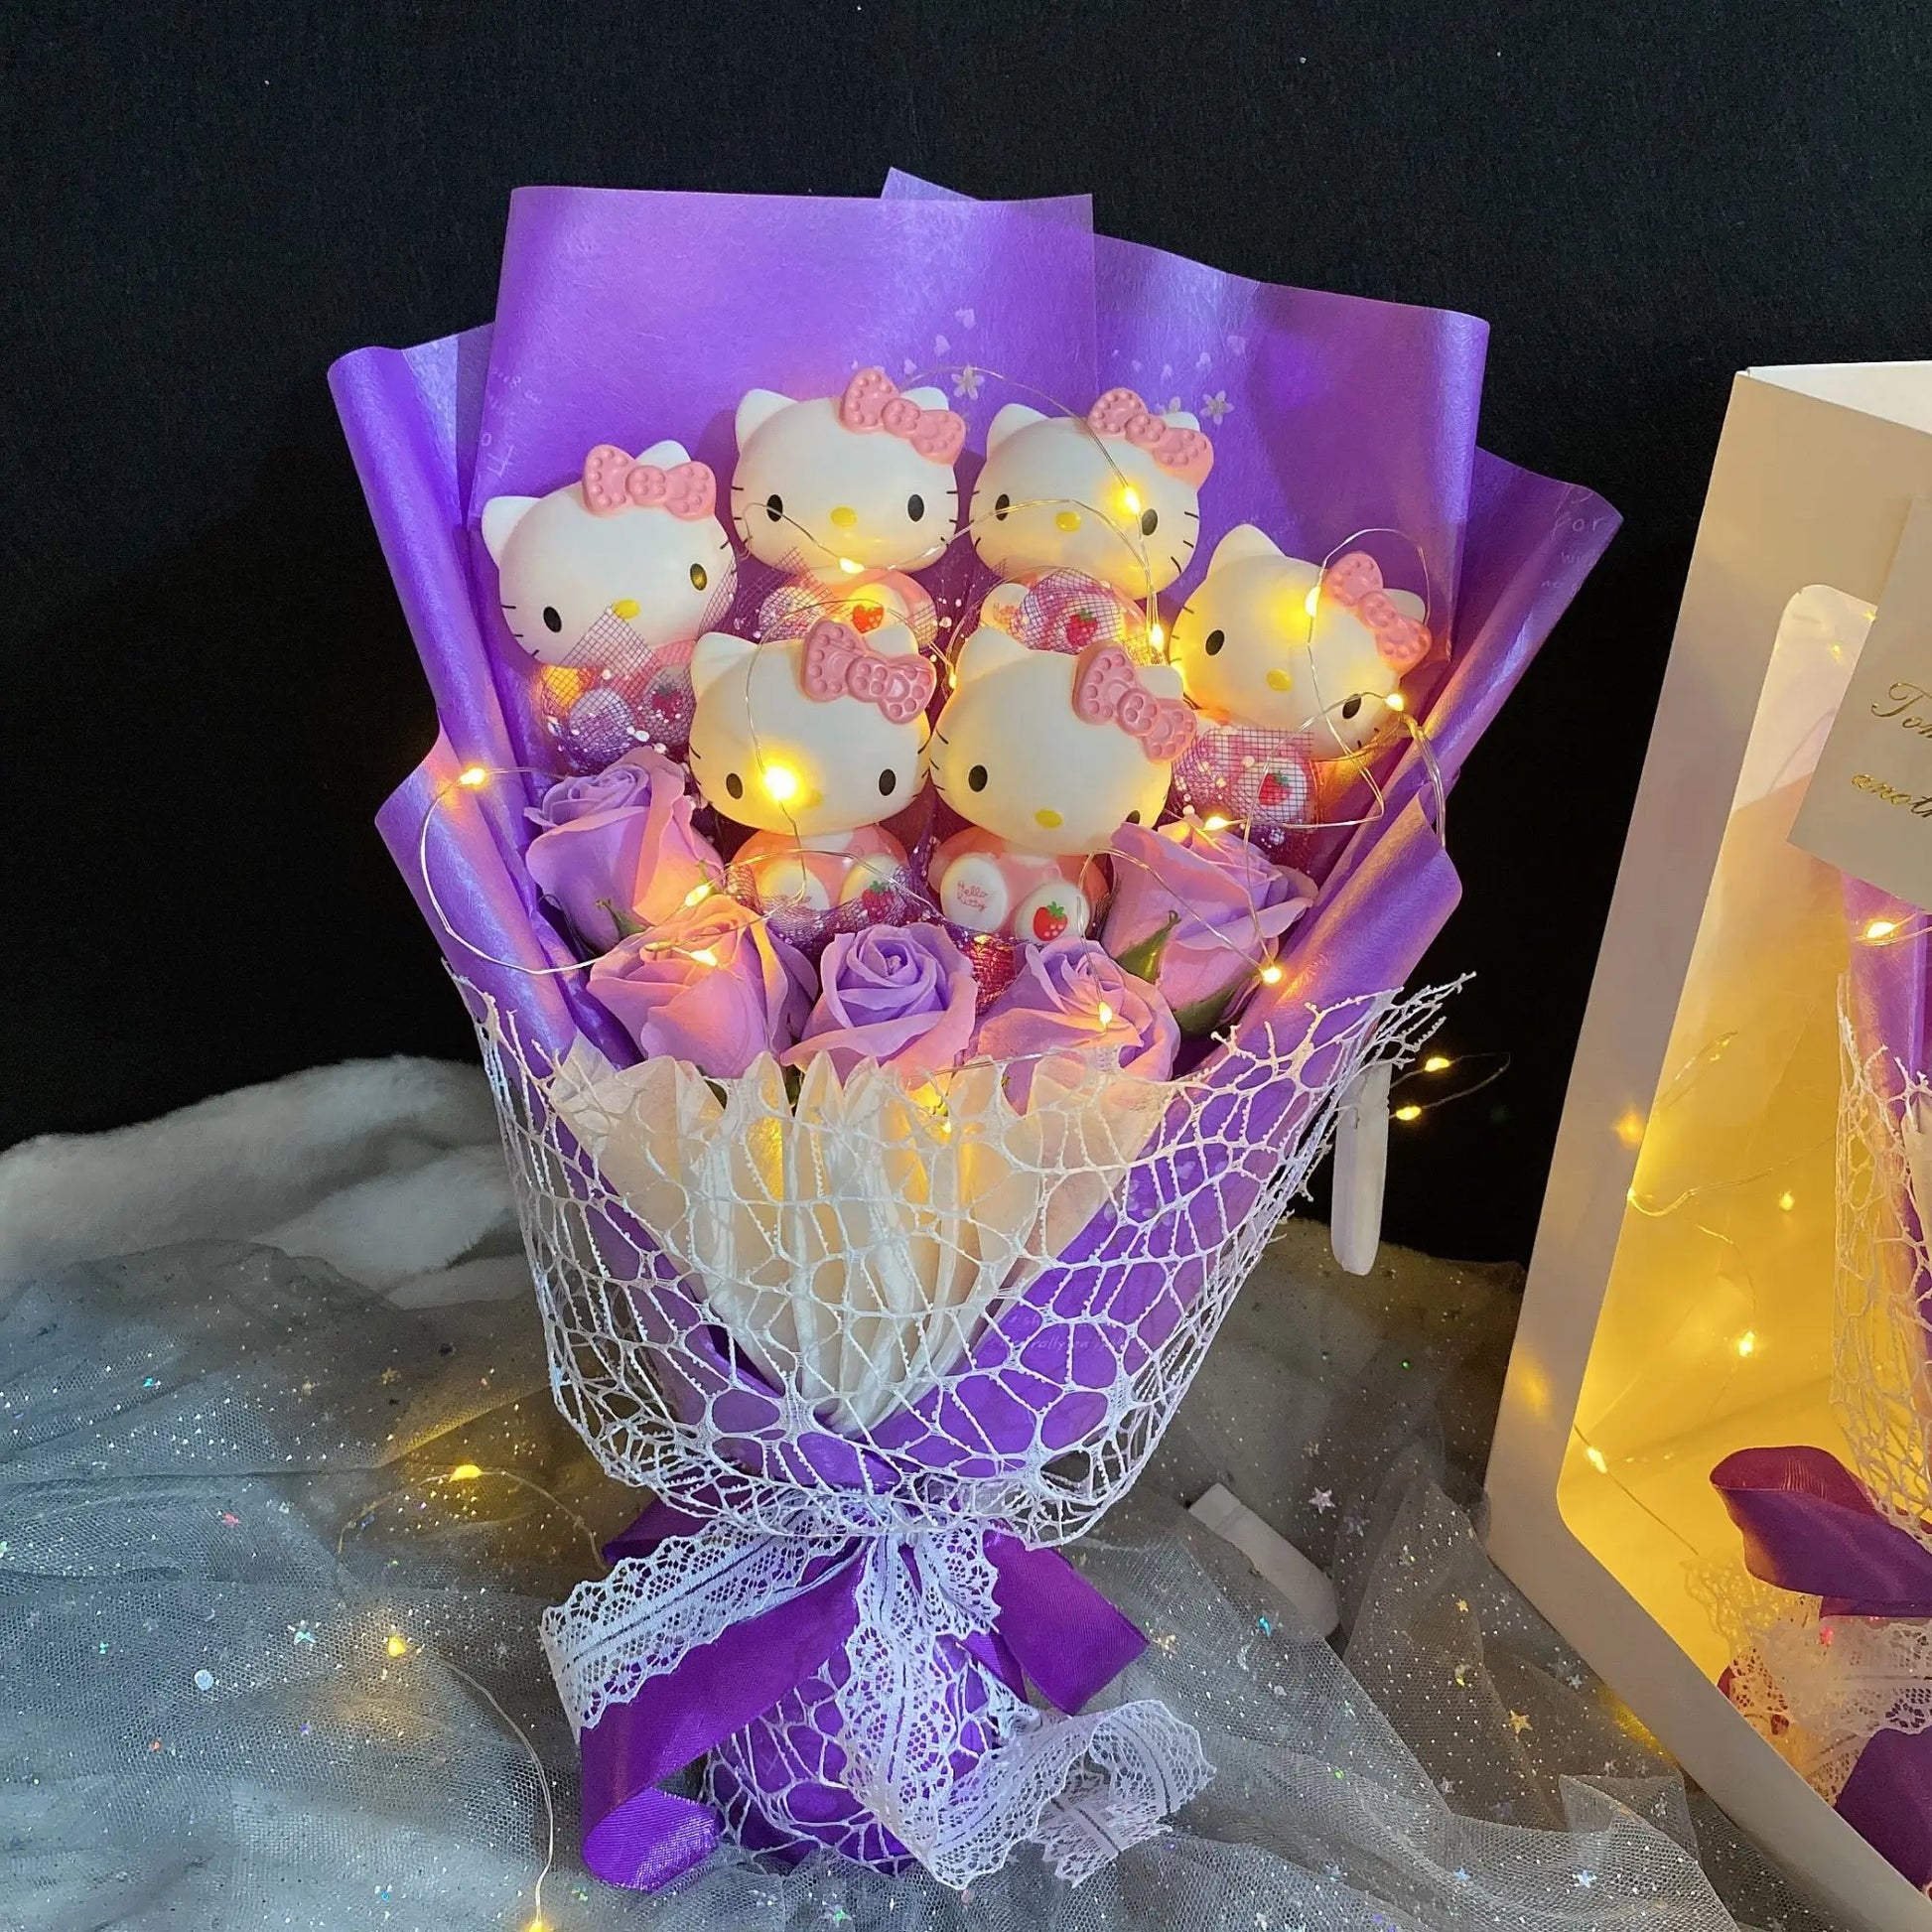 LED Light Hello Kitty Bouquet - My Melody Cinnamoroll Kuromi Edition - T - All Products - Dolls Playsets & Toy Figures